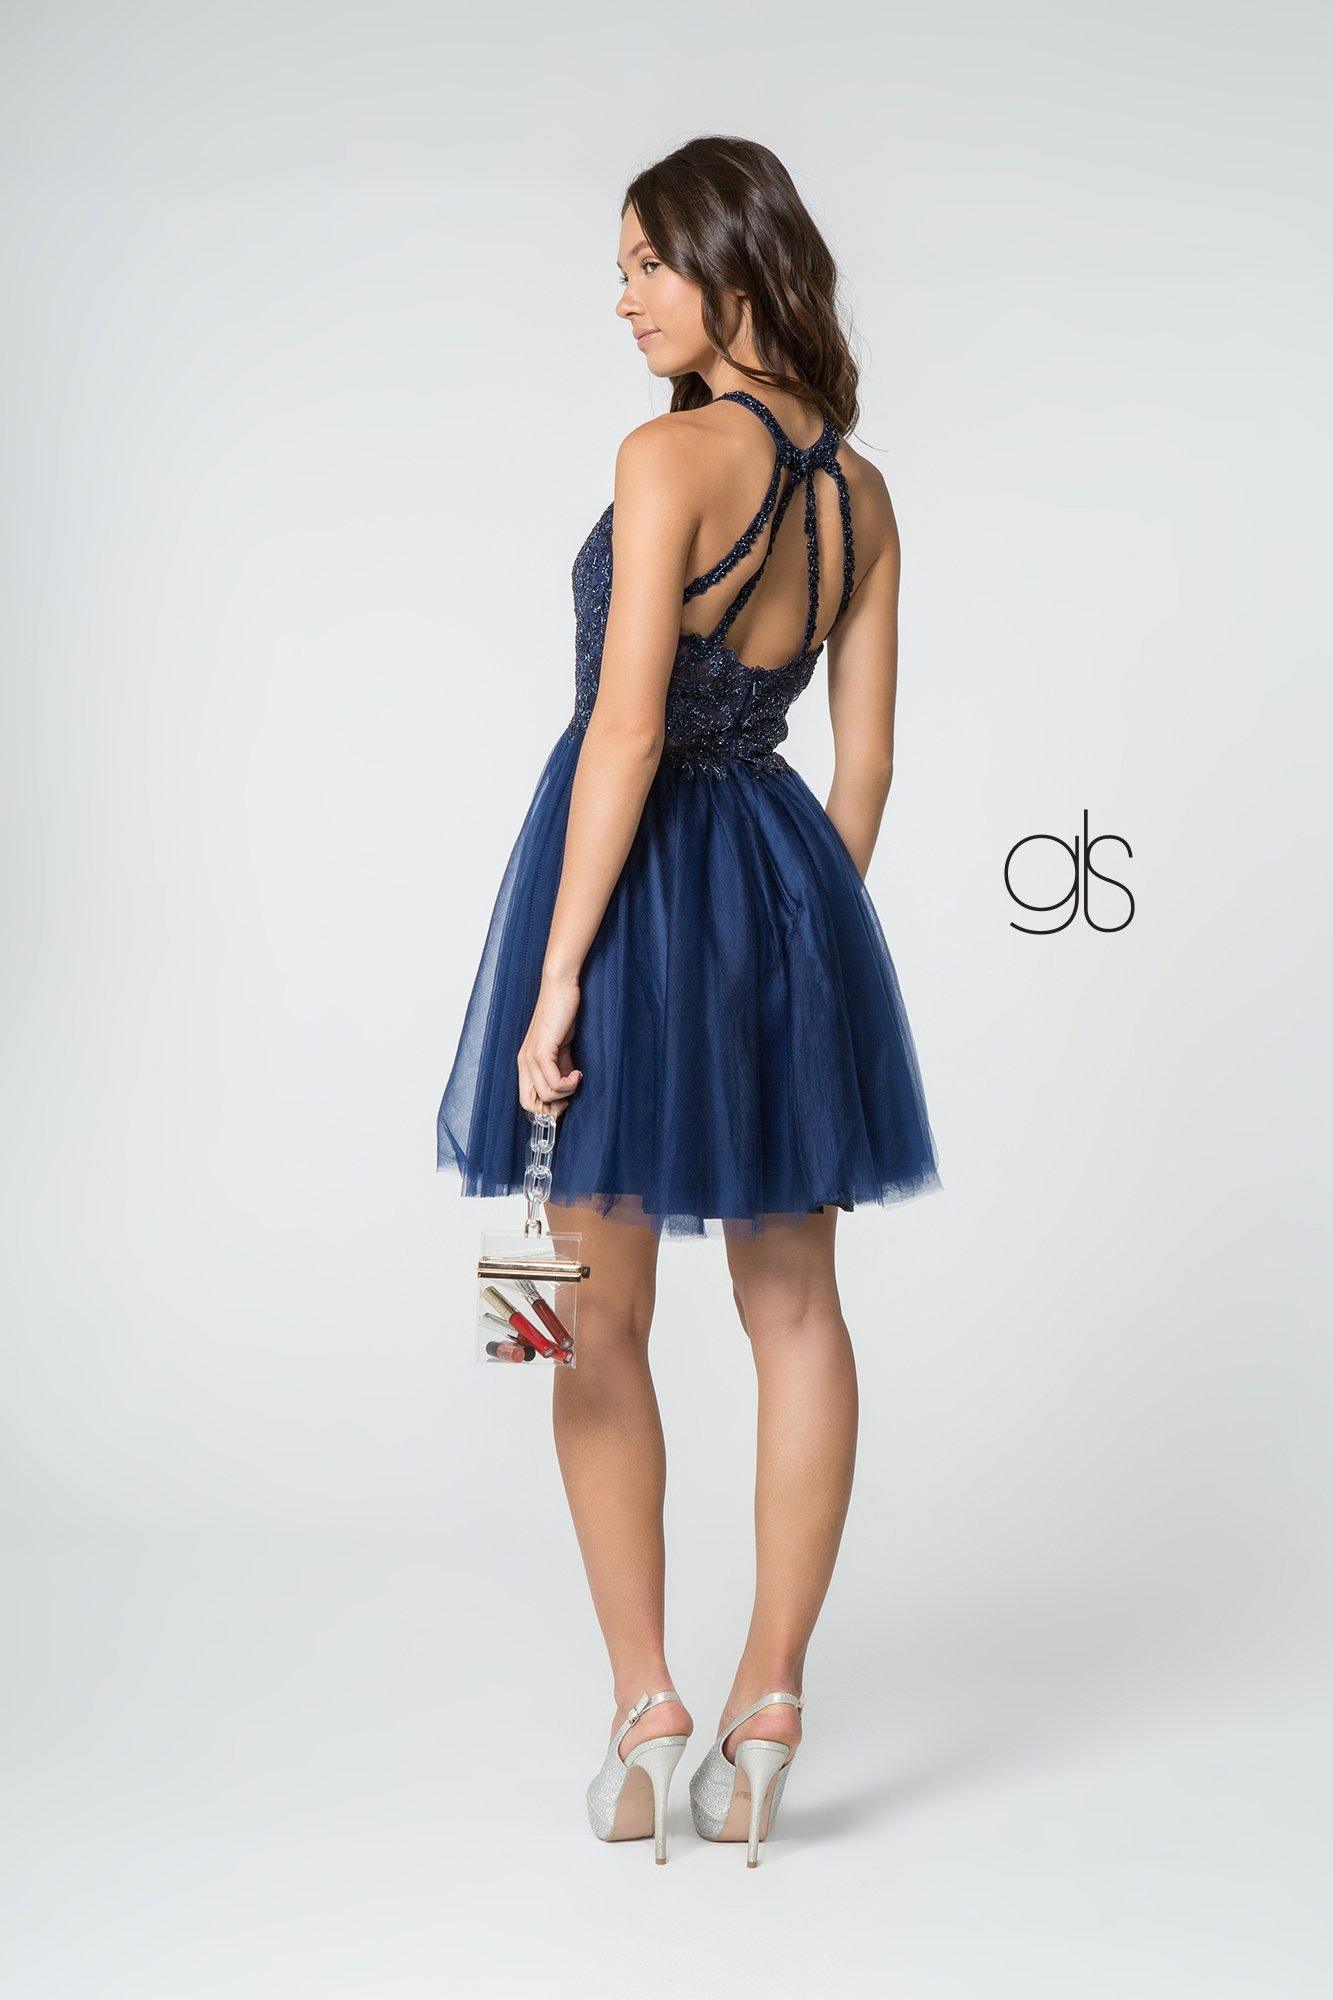 Sleeveless Short Homecoming Dress Sale - The Dress Outlet